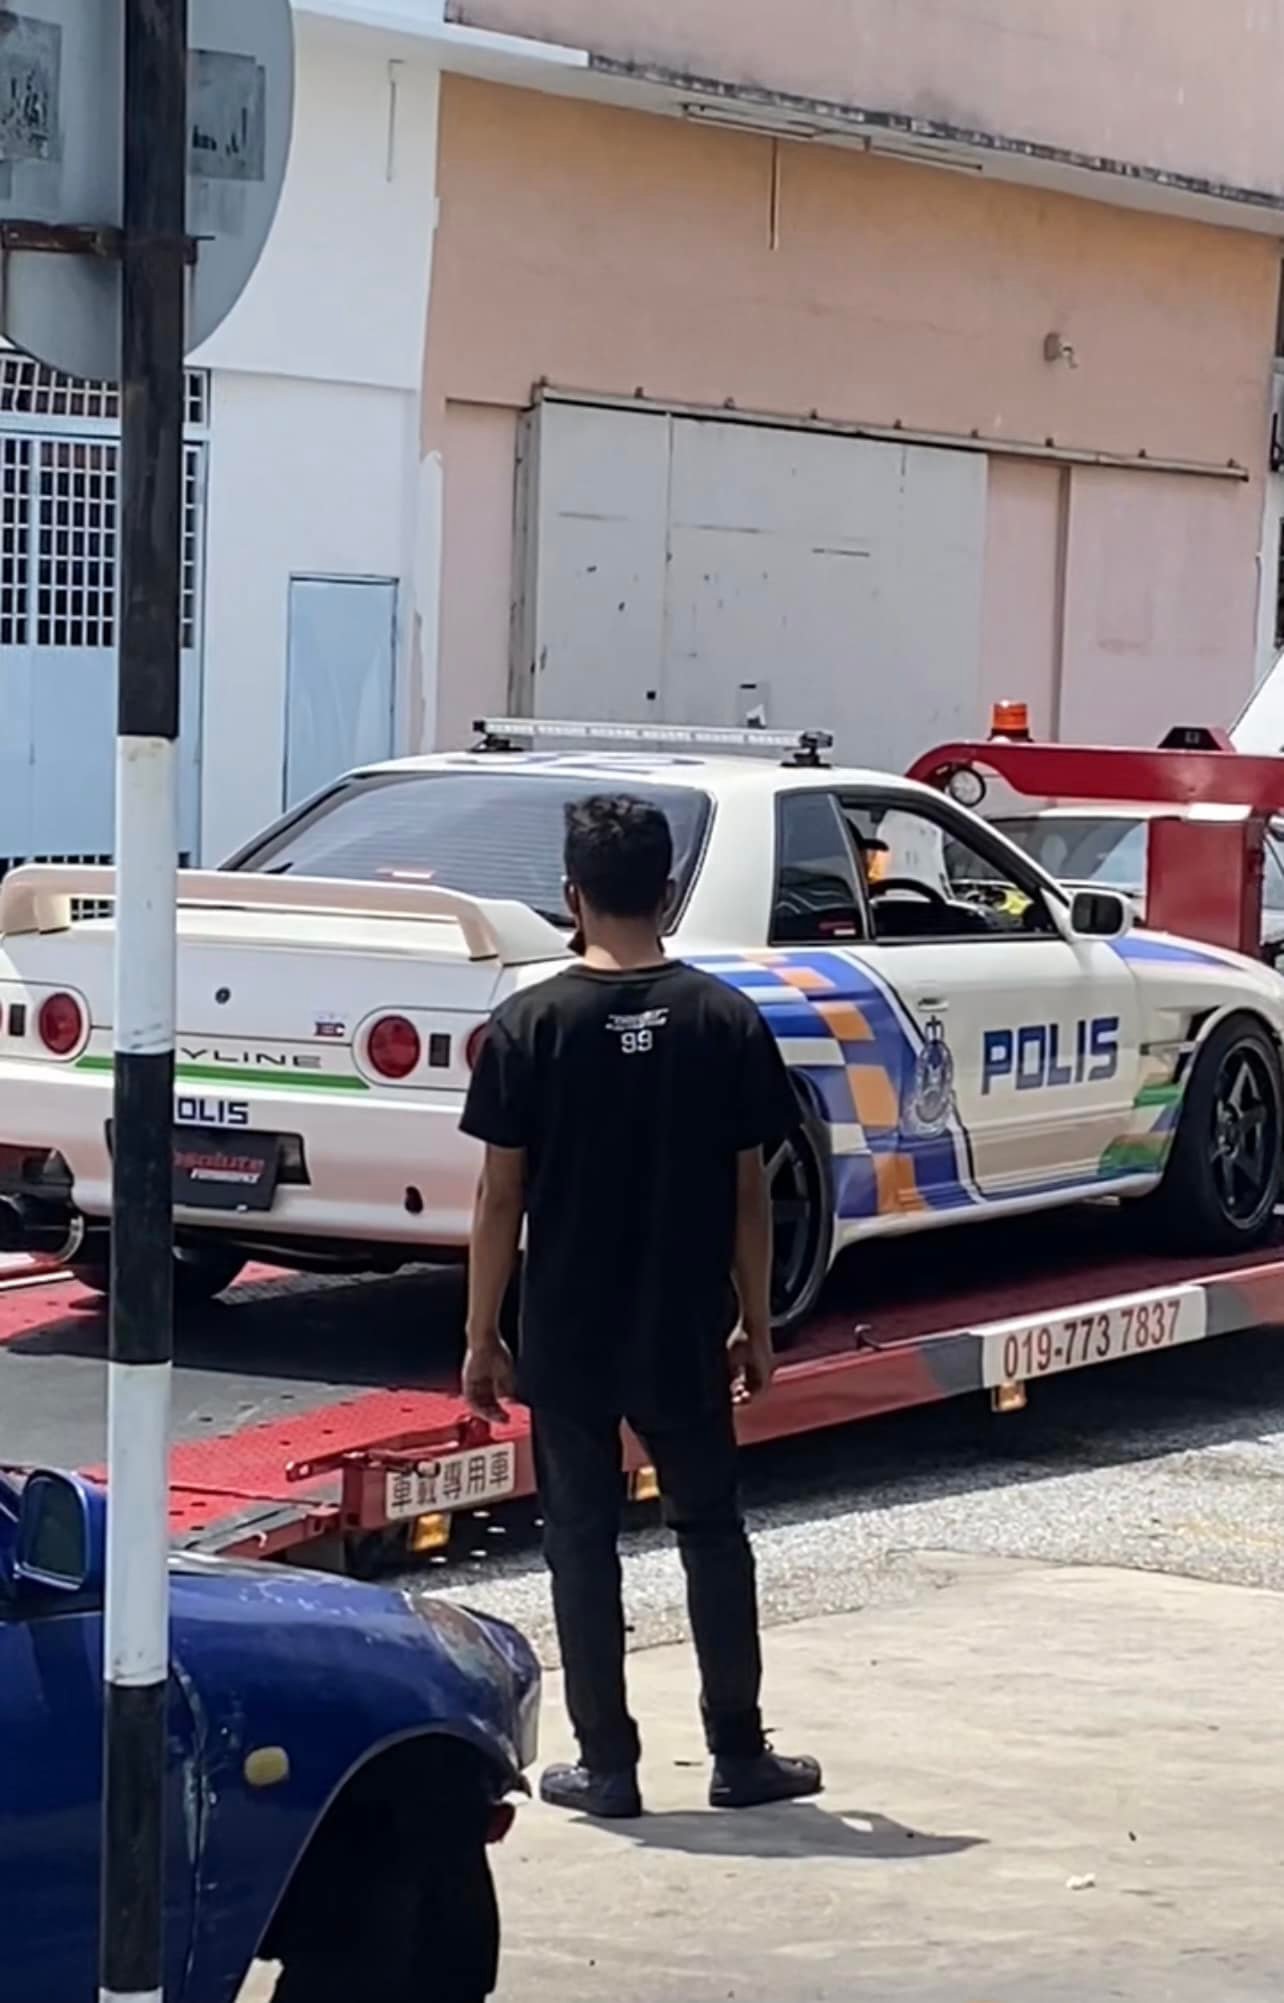 A Nissan Skyline GTR R32 was confiscated by the police for looking like a patrol car. Image credit: PDRM